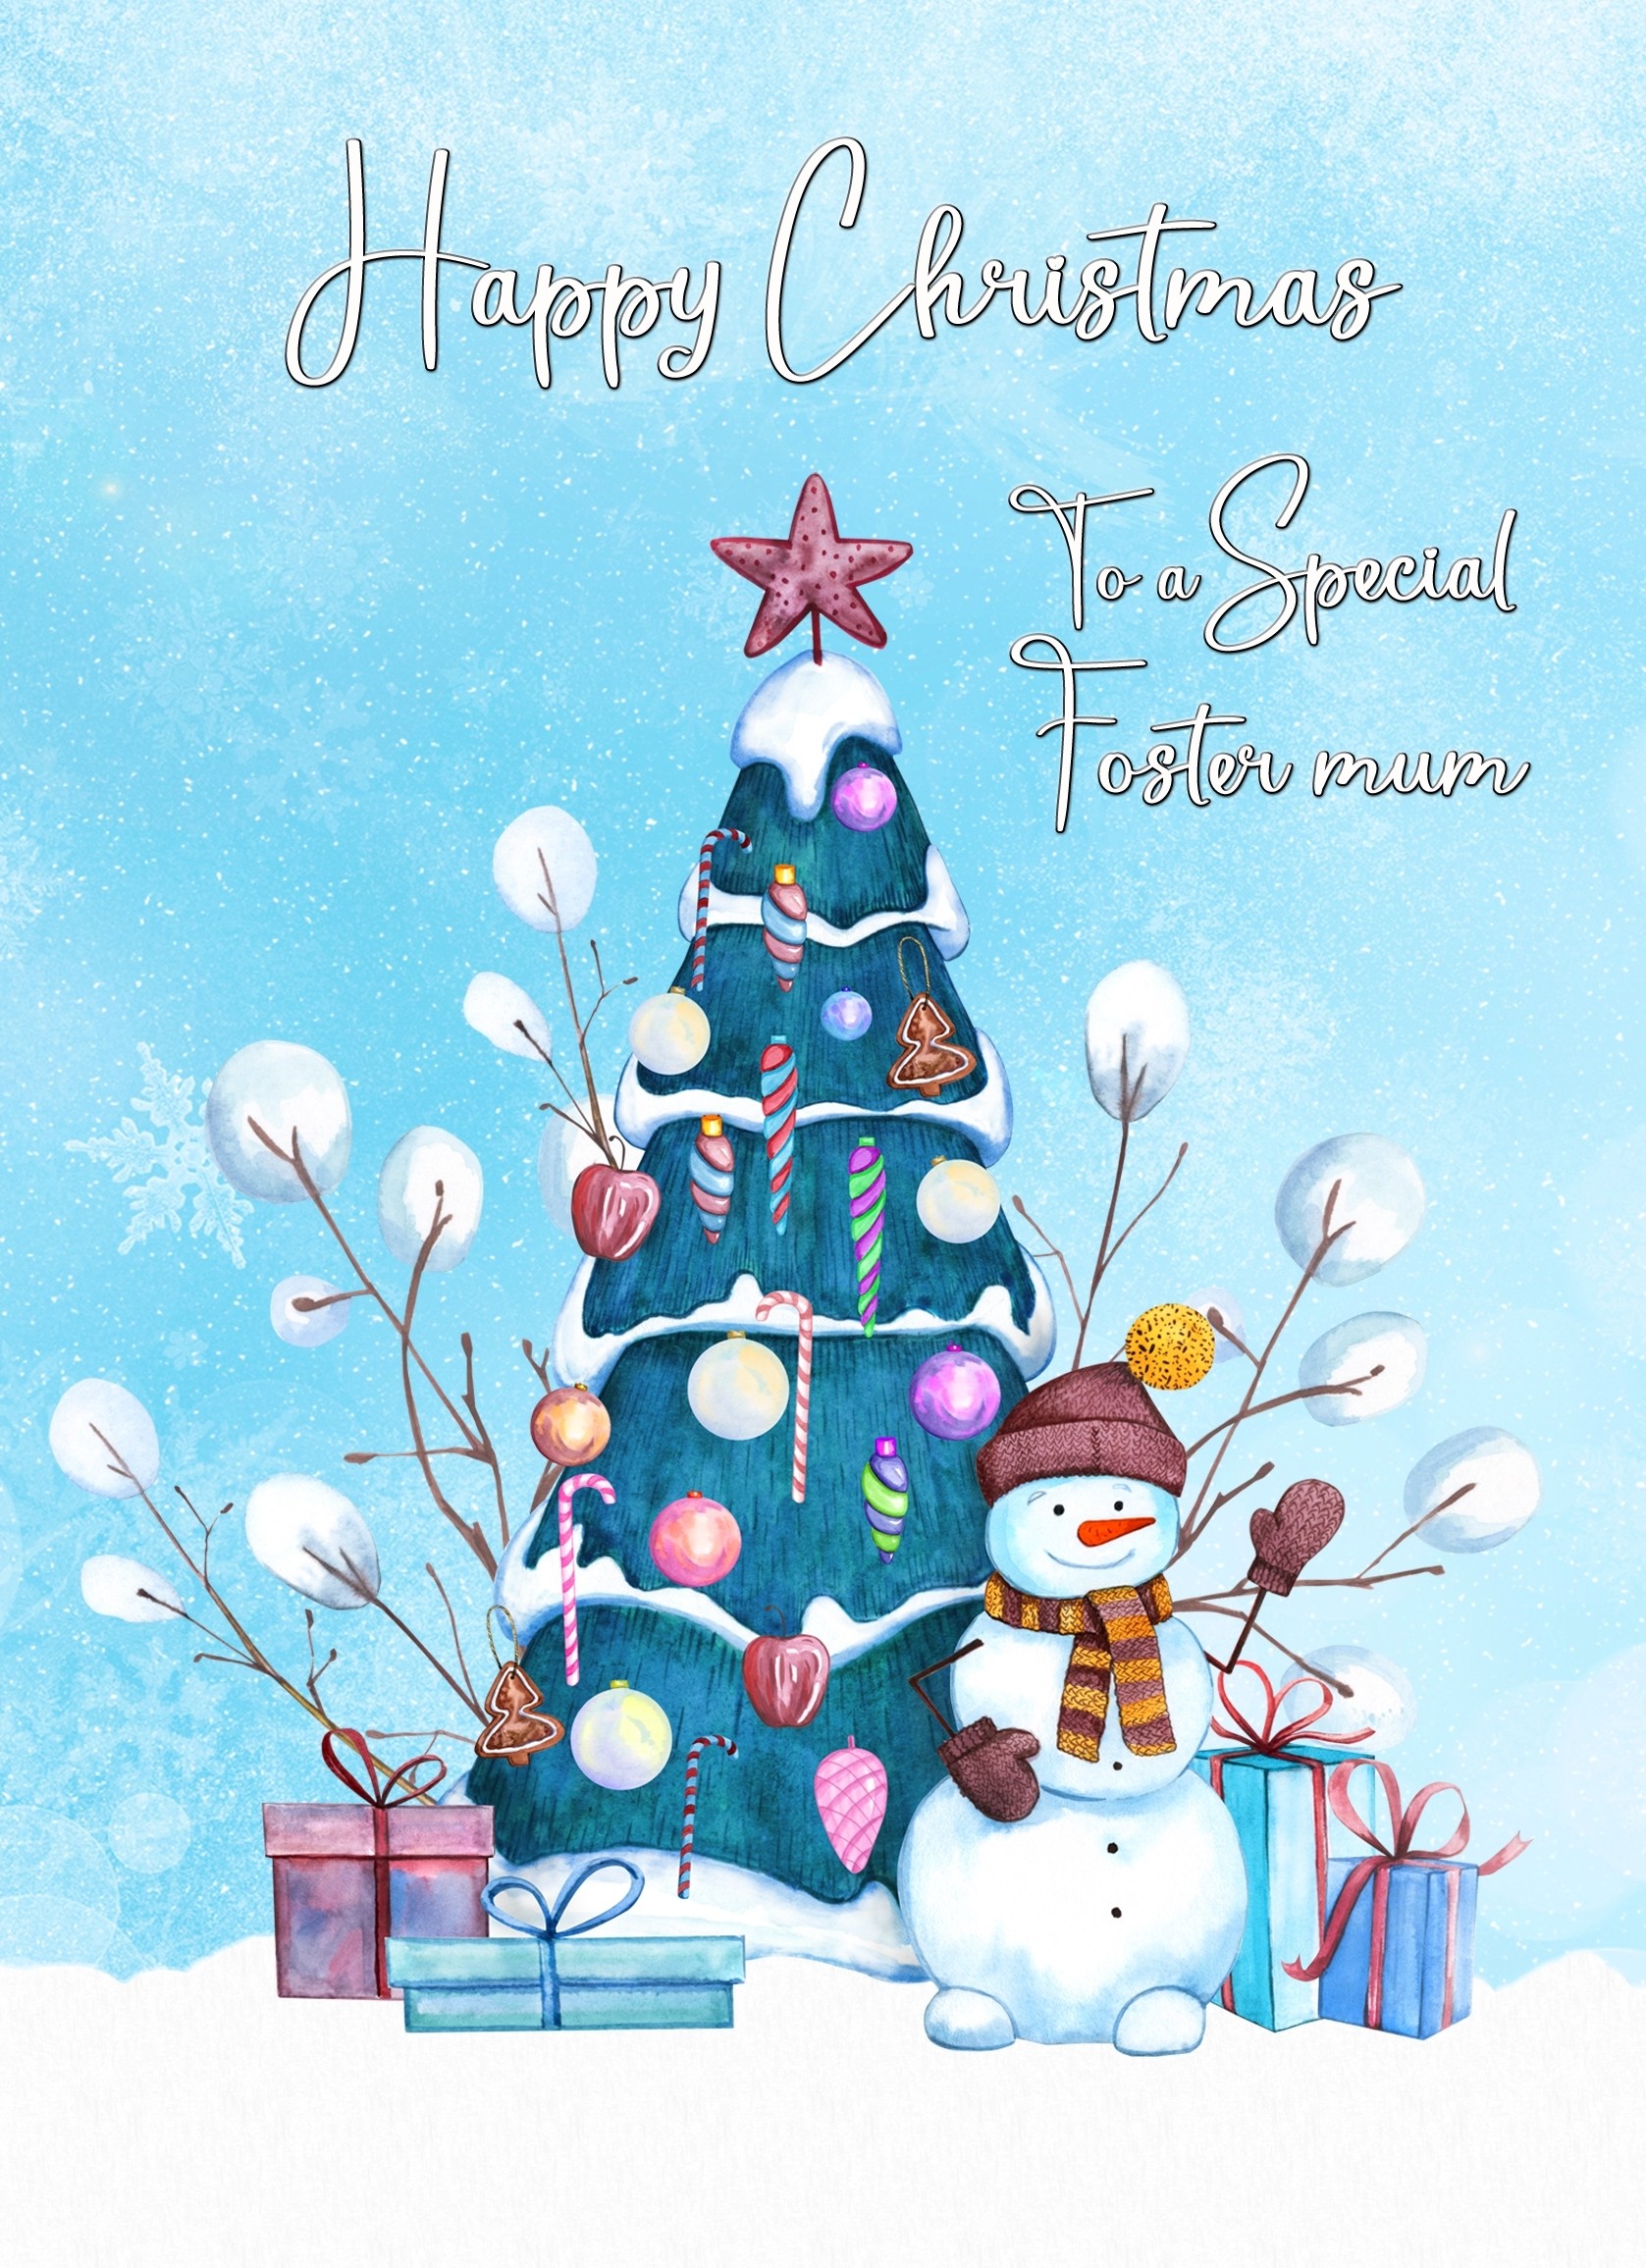 Christmas Card For Foster Mum (Blue Christmas Tree)